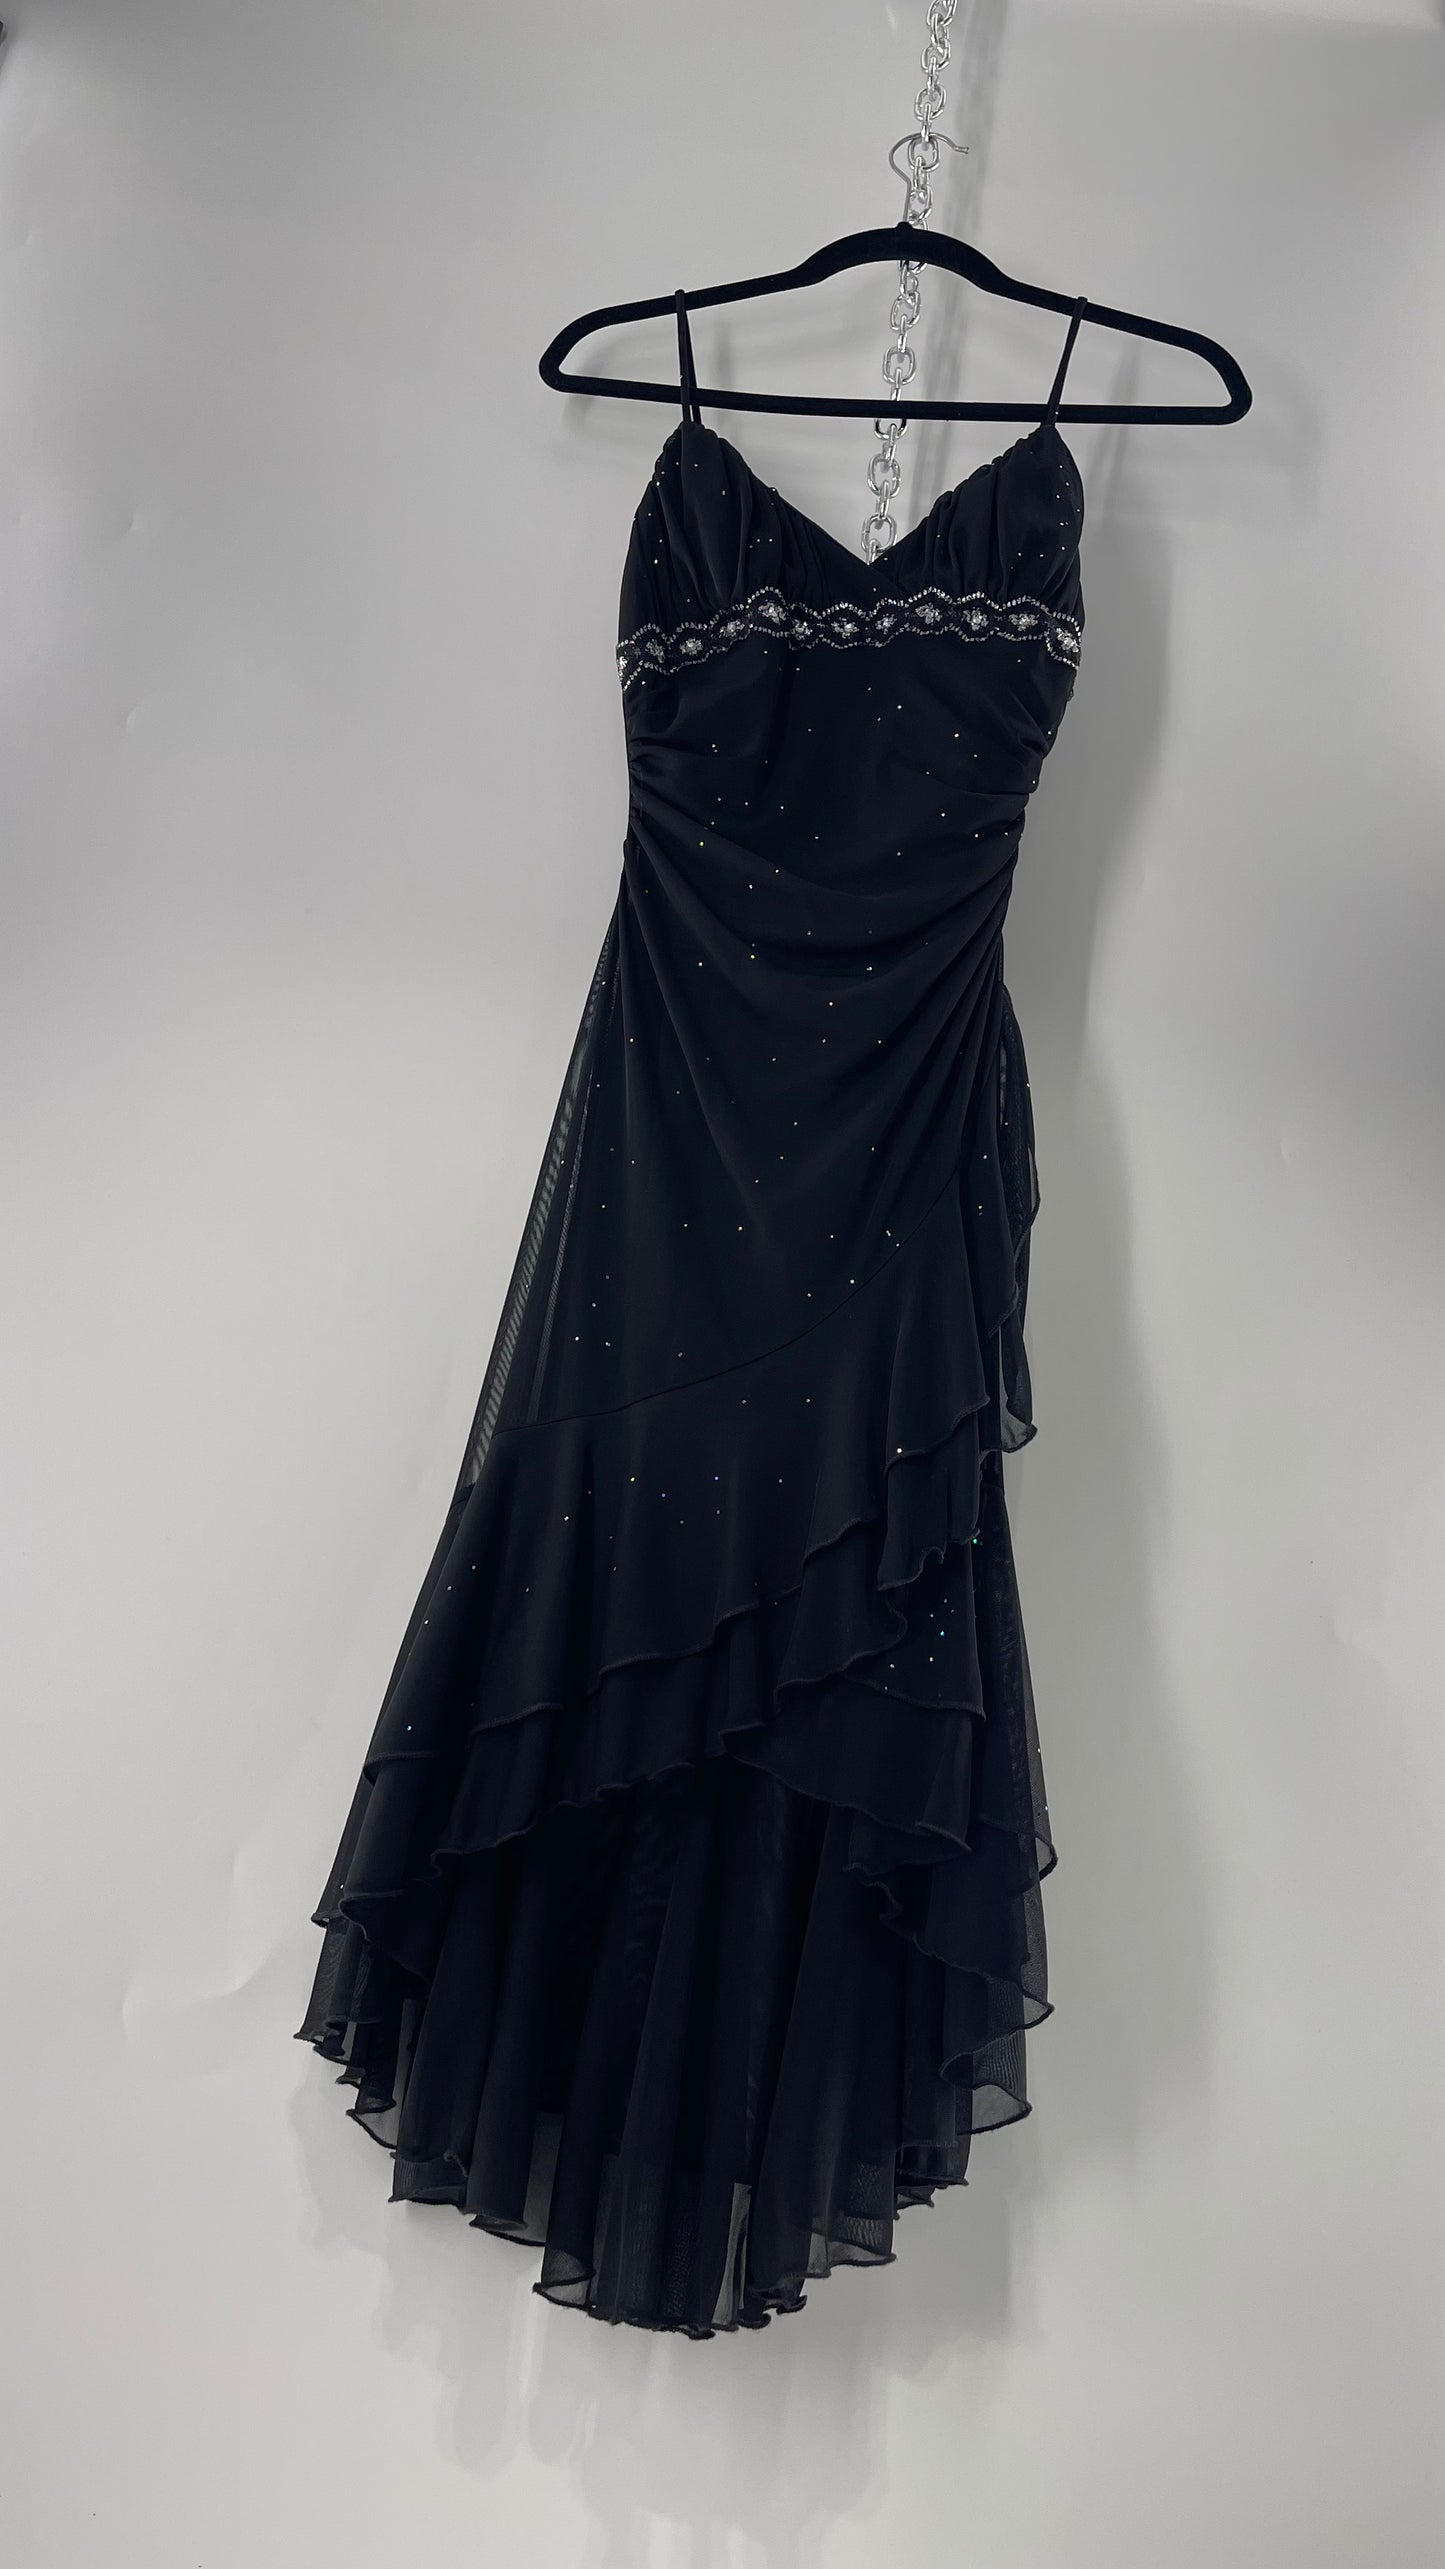 Vintage Taboo Midi Dress with Iridescent Sequins with Lace Underbust Detail, High Low Silhouette and Frills (Medium)